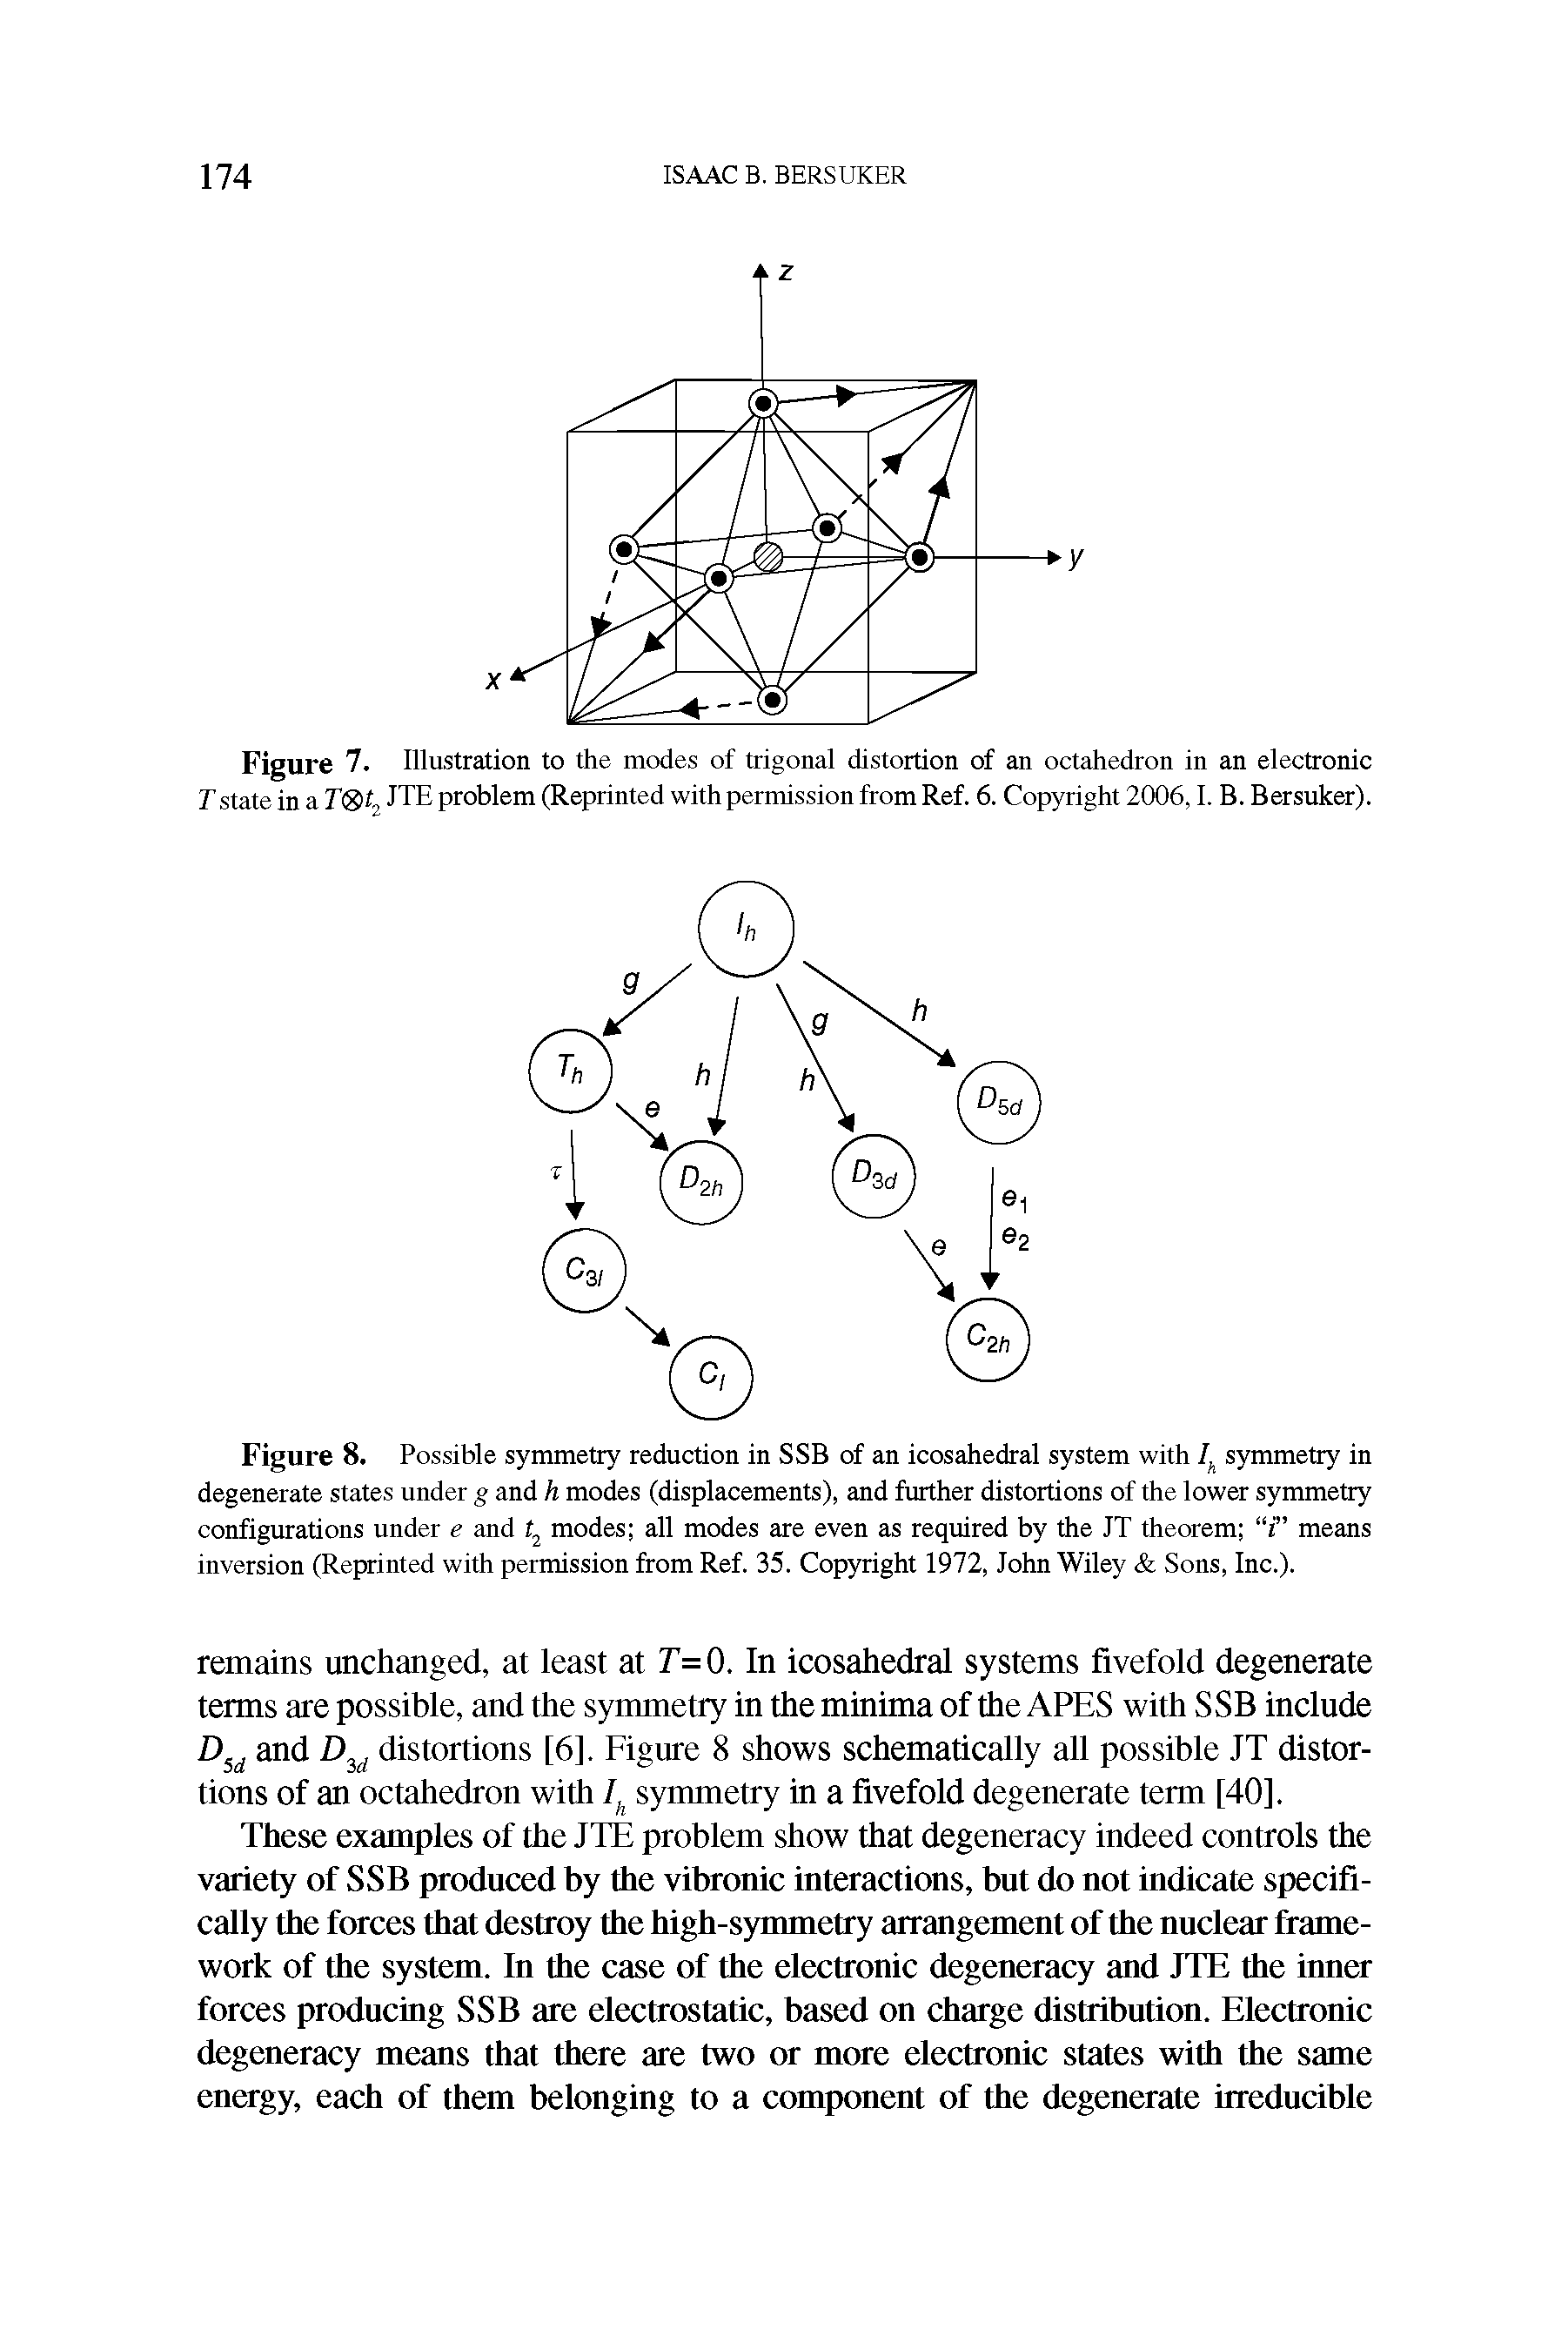 Figure 8. Possible symmetry reduction in SSB of an icosahedral system with symmetry in degenerate states under g and h modes (displacements), and further distortions of the lower symmetry configurations under e and modes all modes are even as required by the JT theorem i means inversion (Reprinted with permission from Ref. 35. Copyright 1972, John Wiley Sons, Inc.).